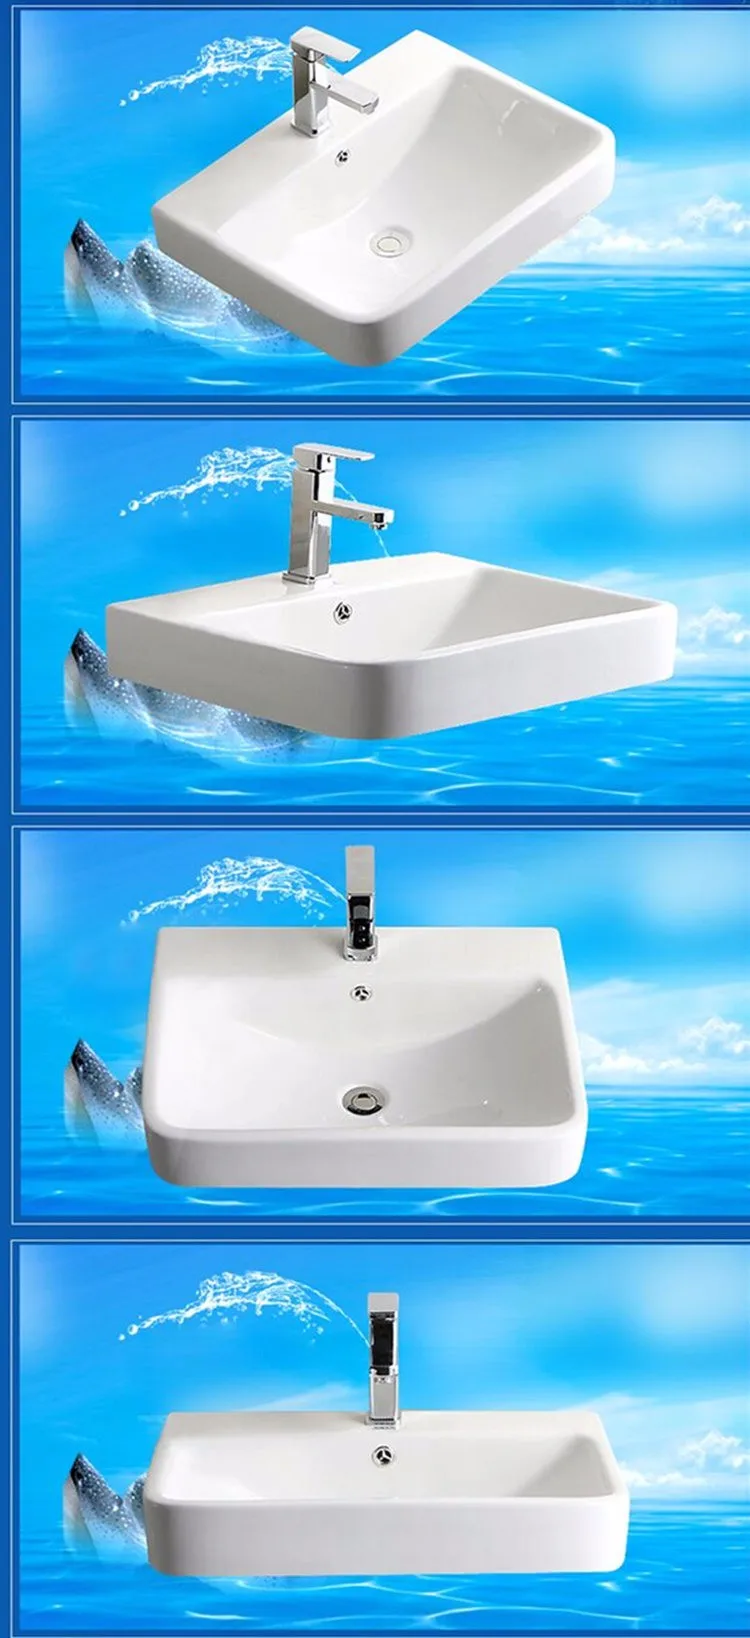 China factory cheap vanity bathroom sinks for sale